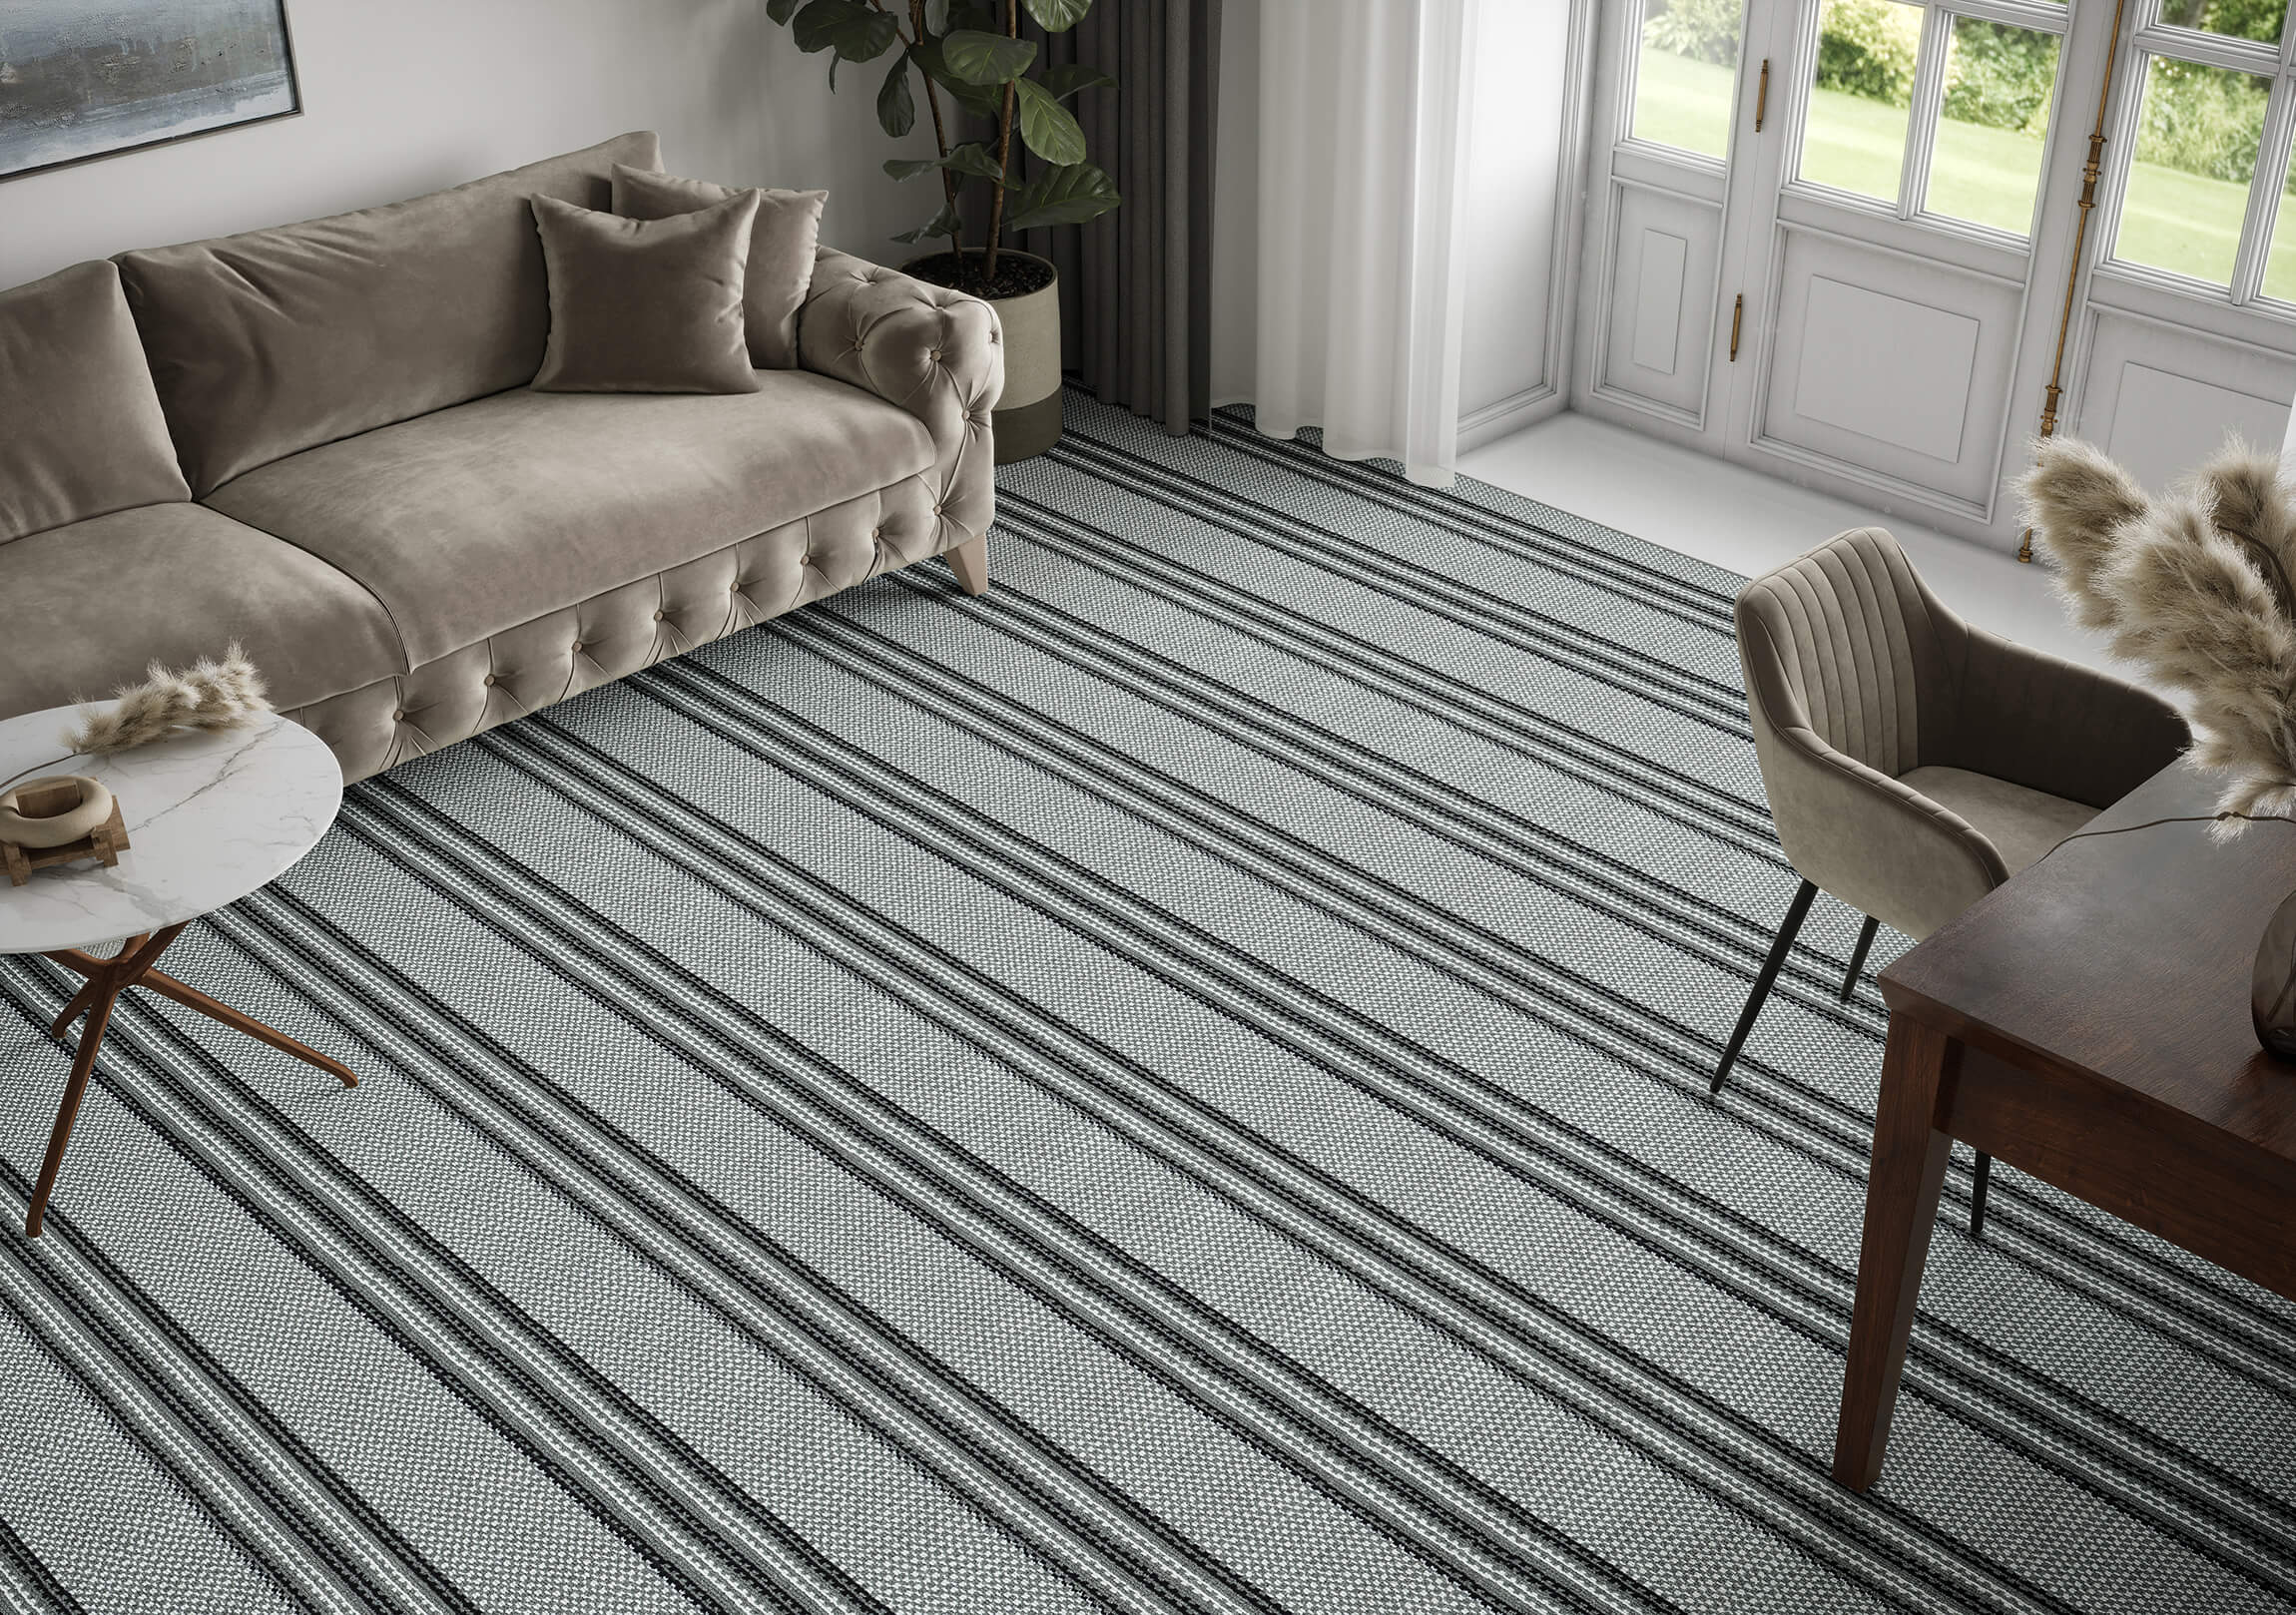 Lifestyle 3D Render of a Striped Carpet